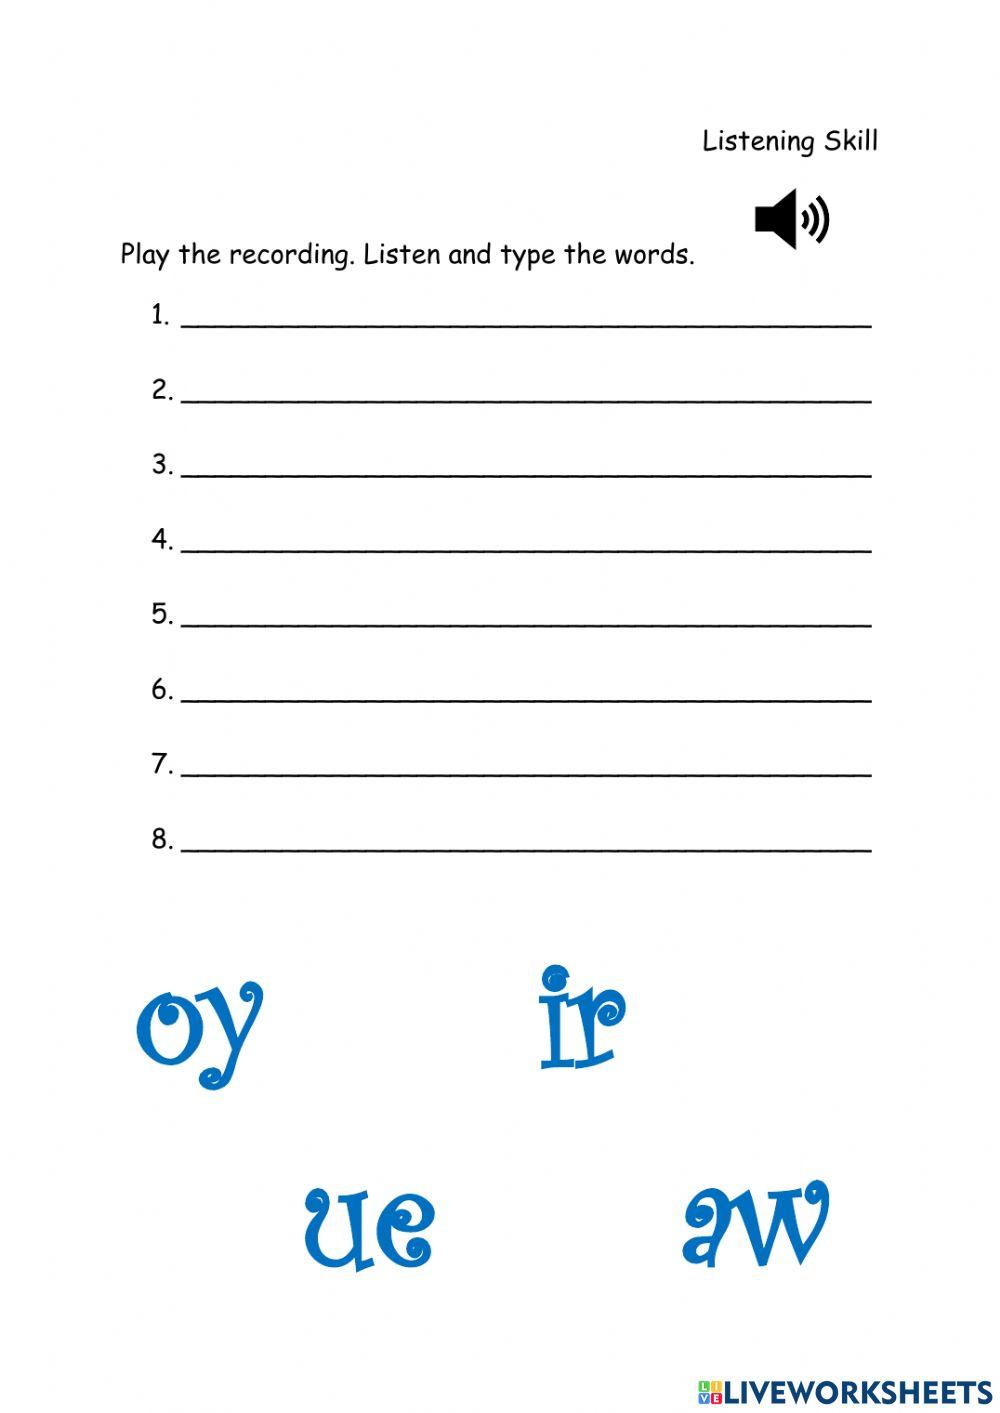 Lesson 5&6-Sounds 'oy', 'ir', 'ue' and 'aw'